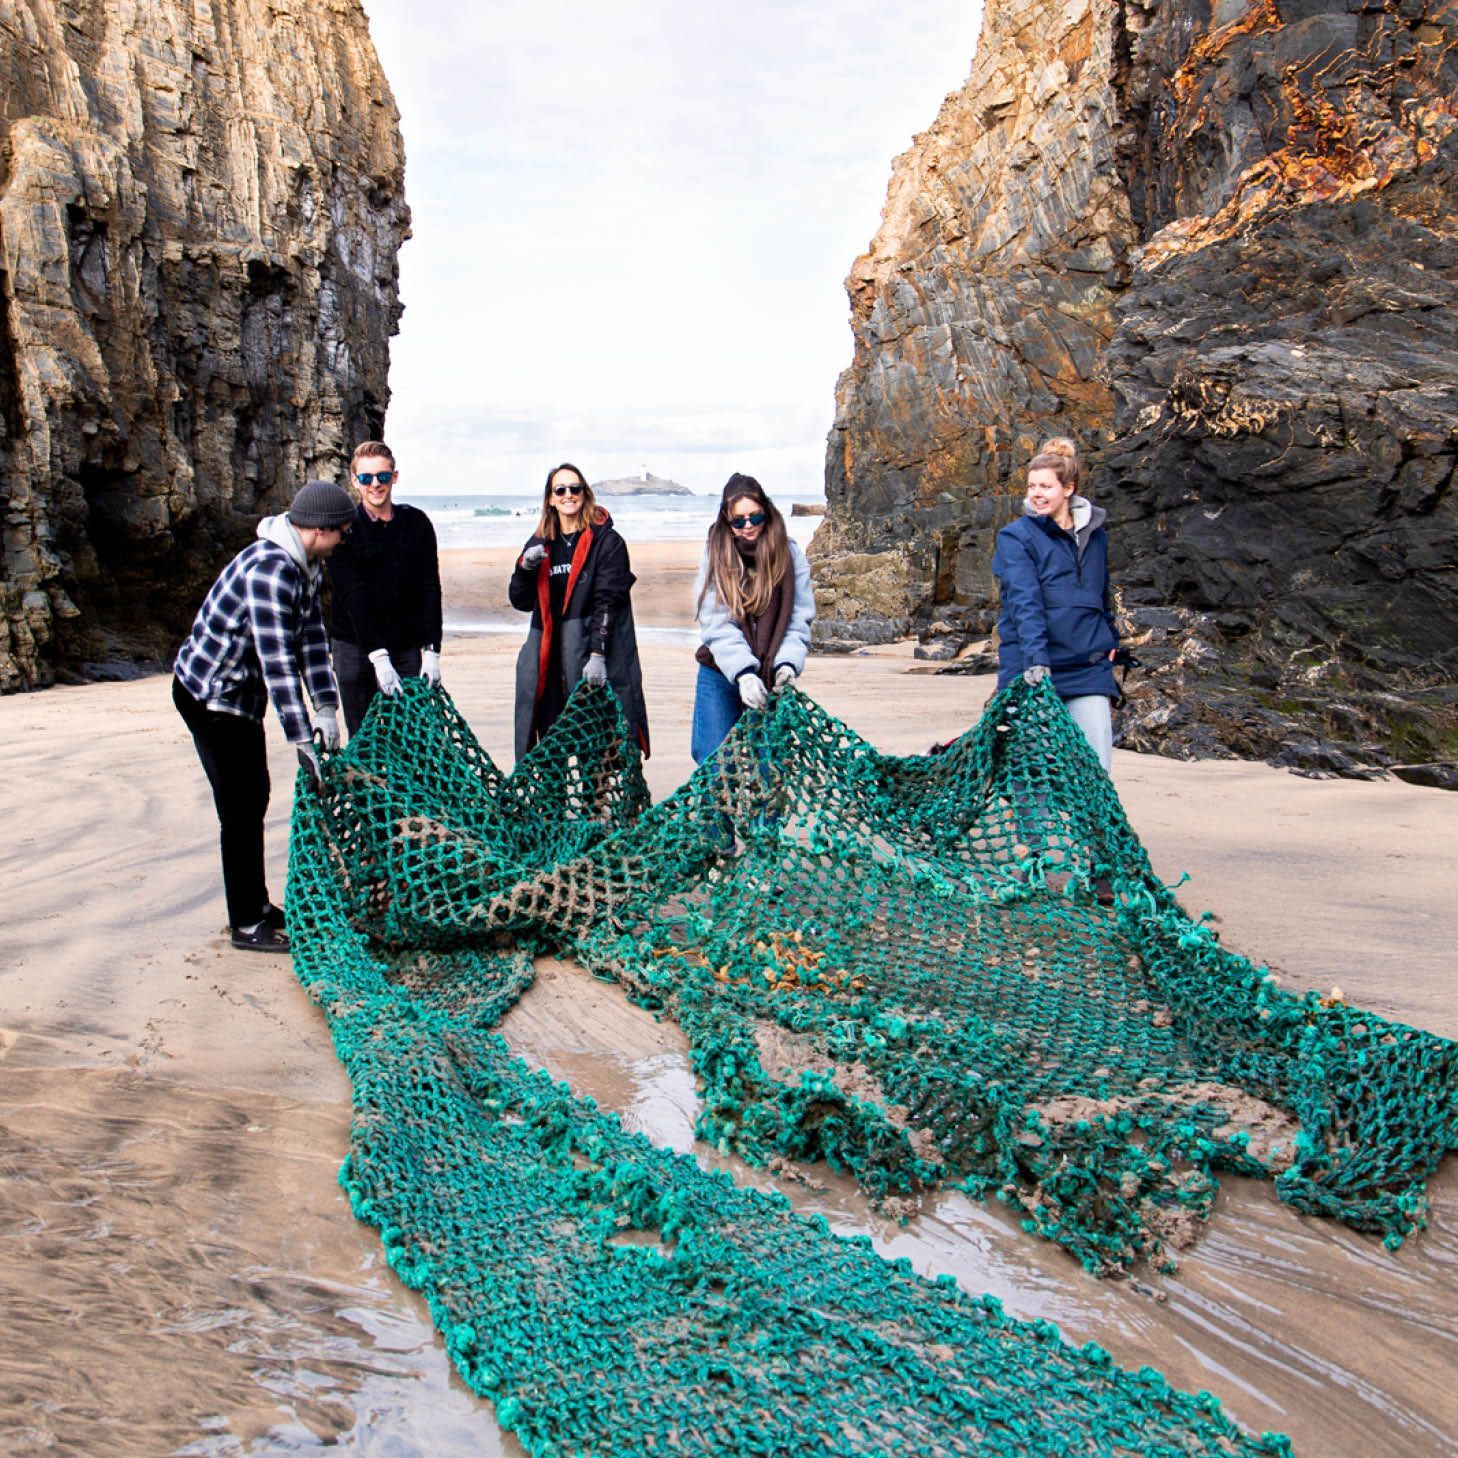 people dragging netting off a beach